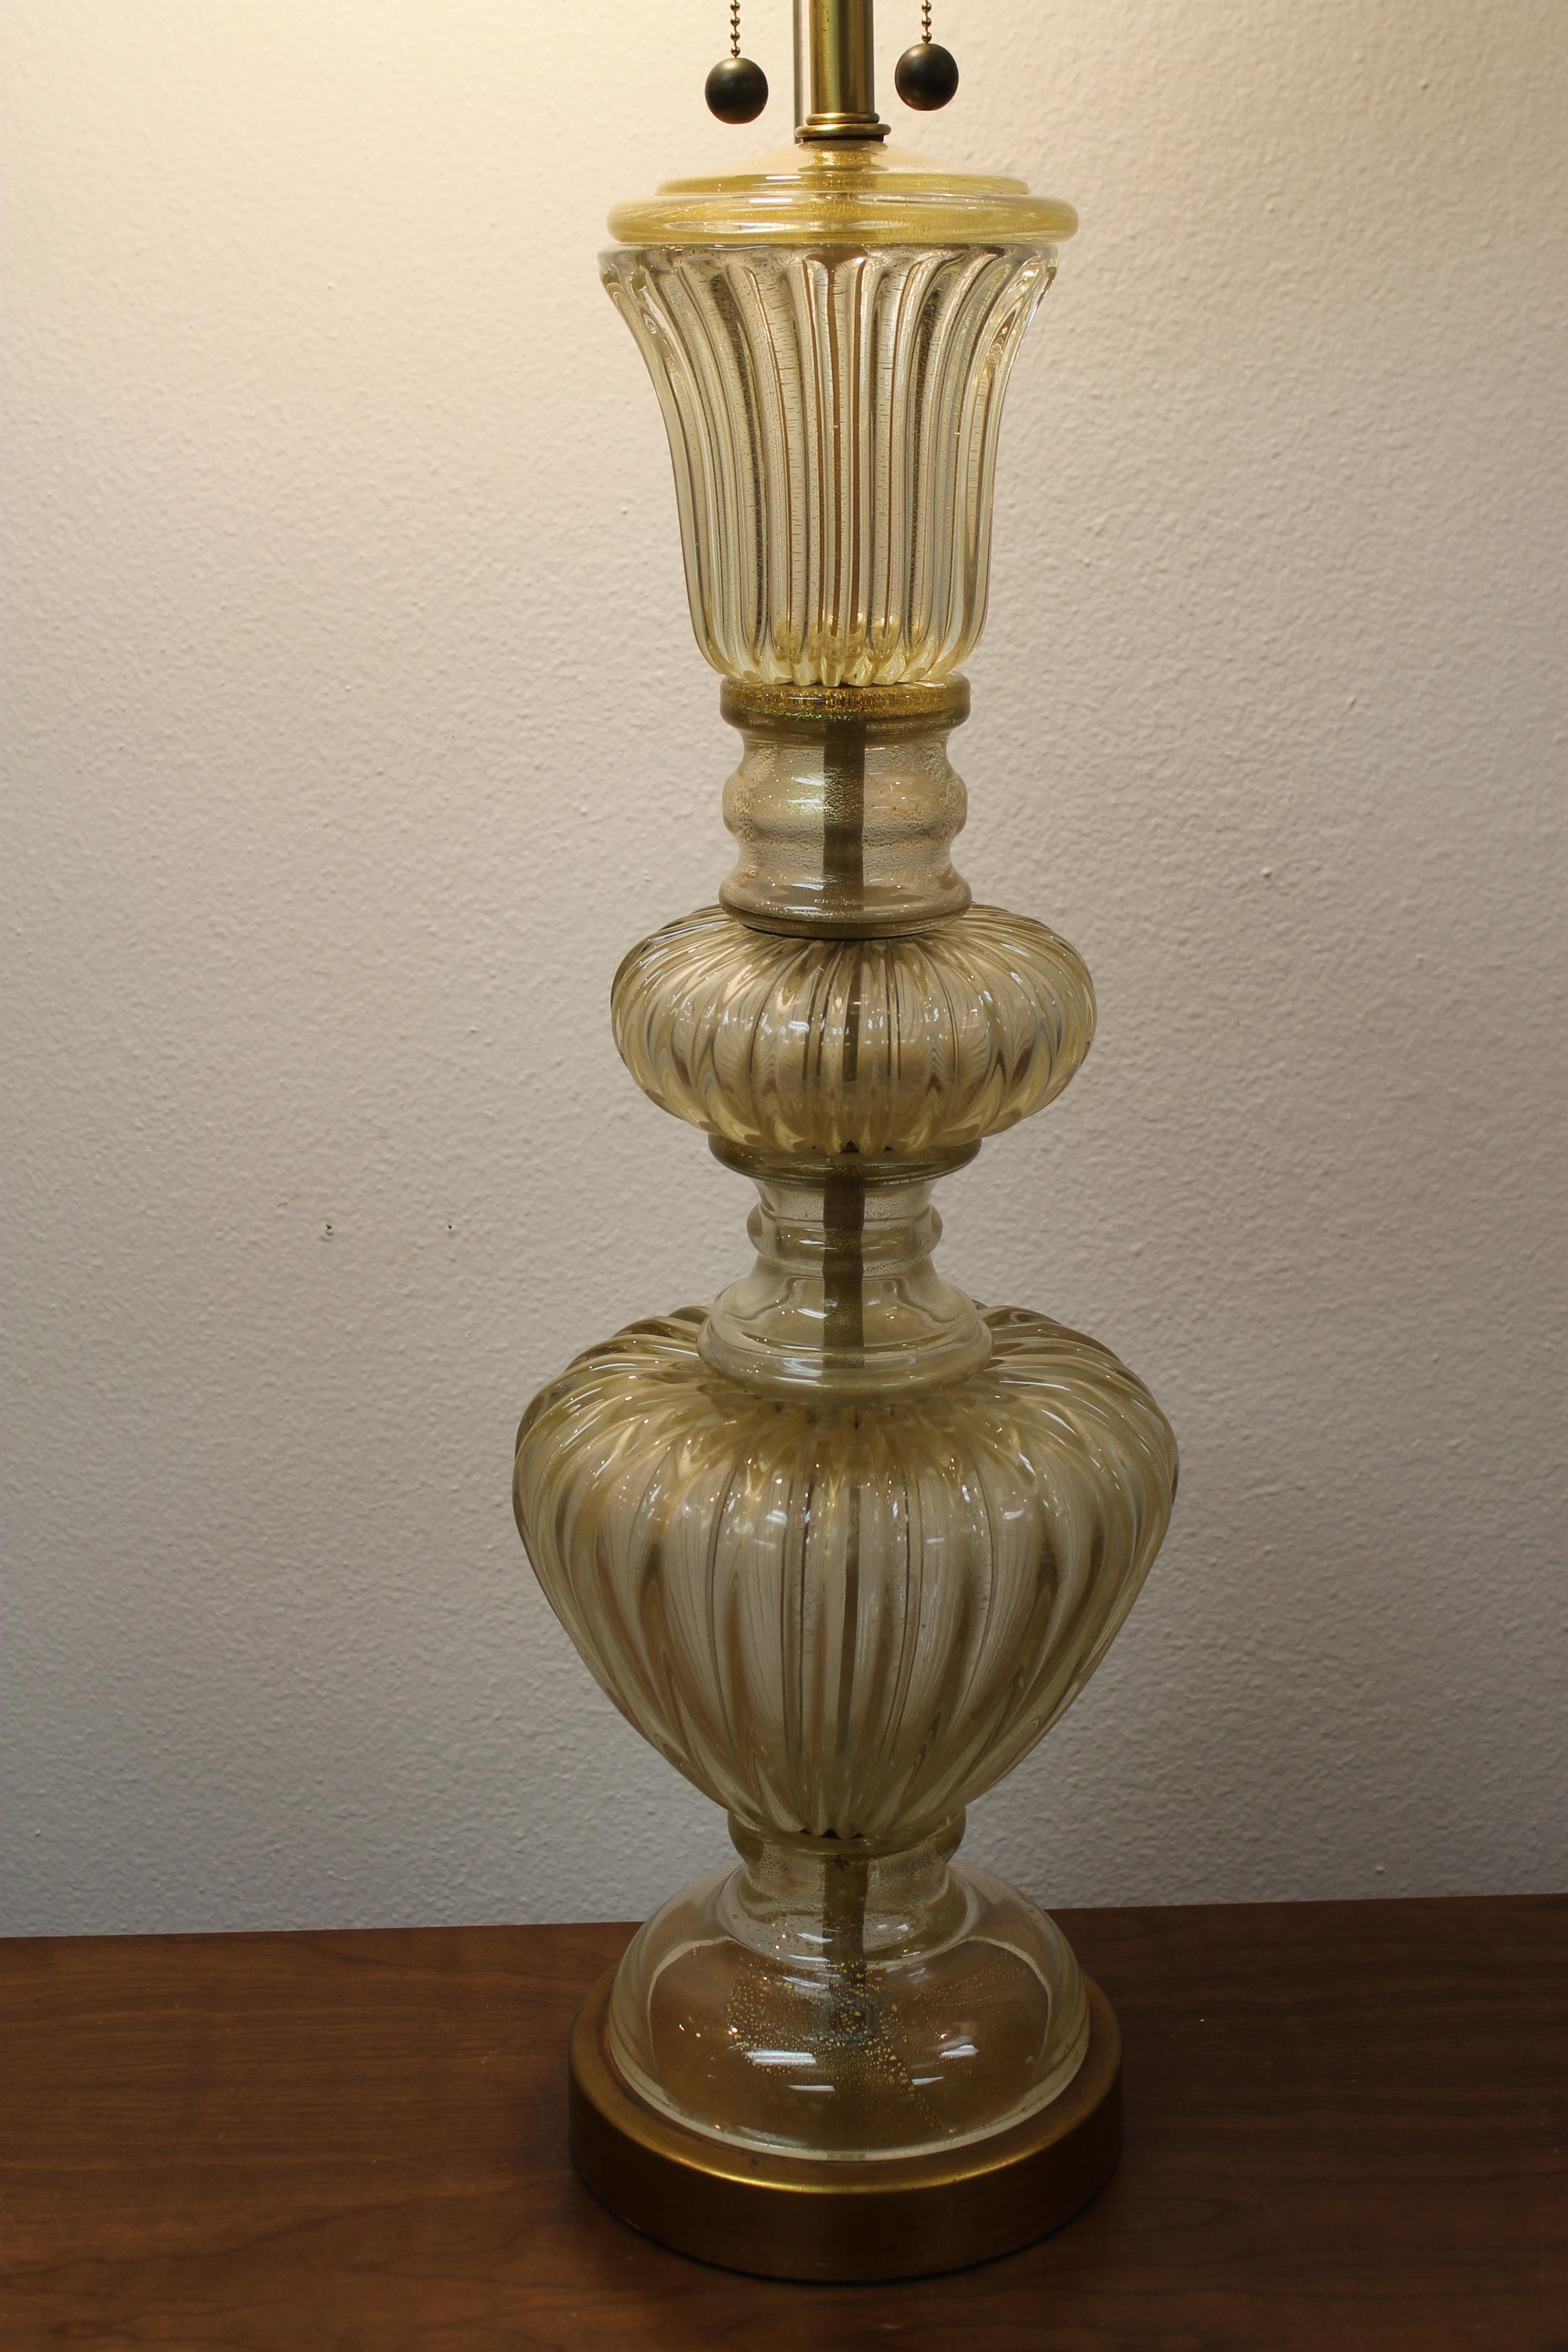 Brass Murano Glass Lamp by The Marbro Lamp Company, Los Angeles, CA.